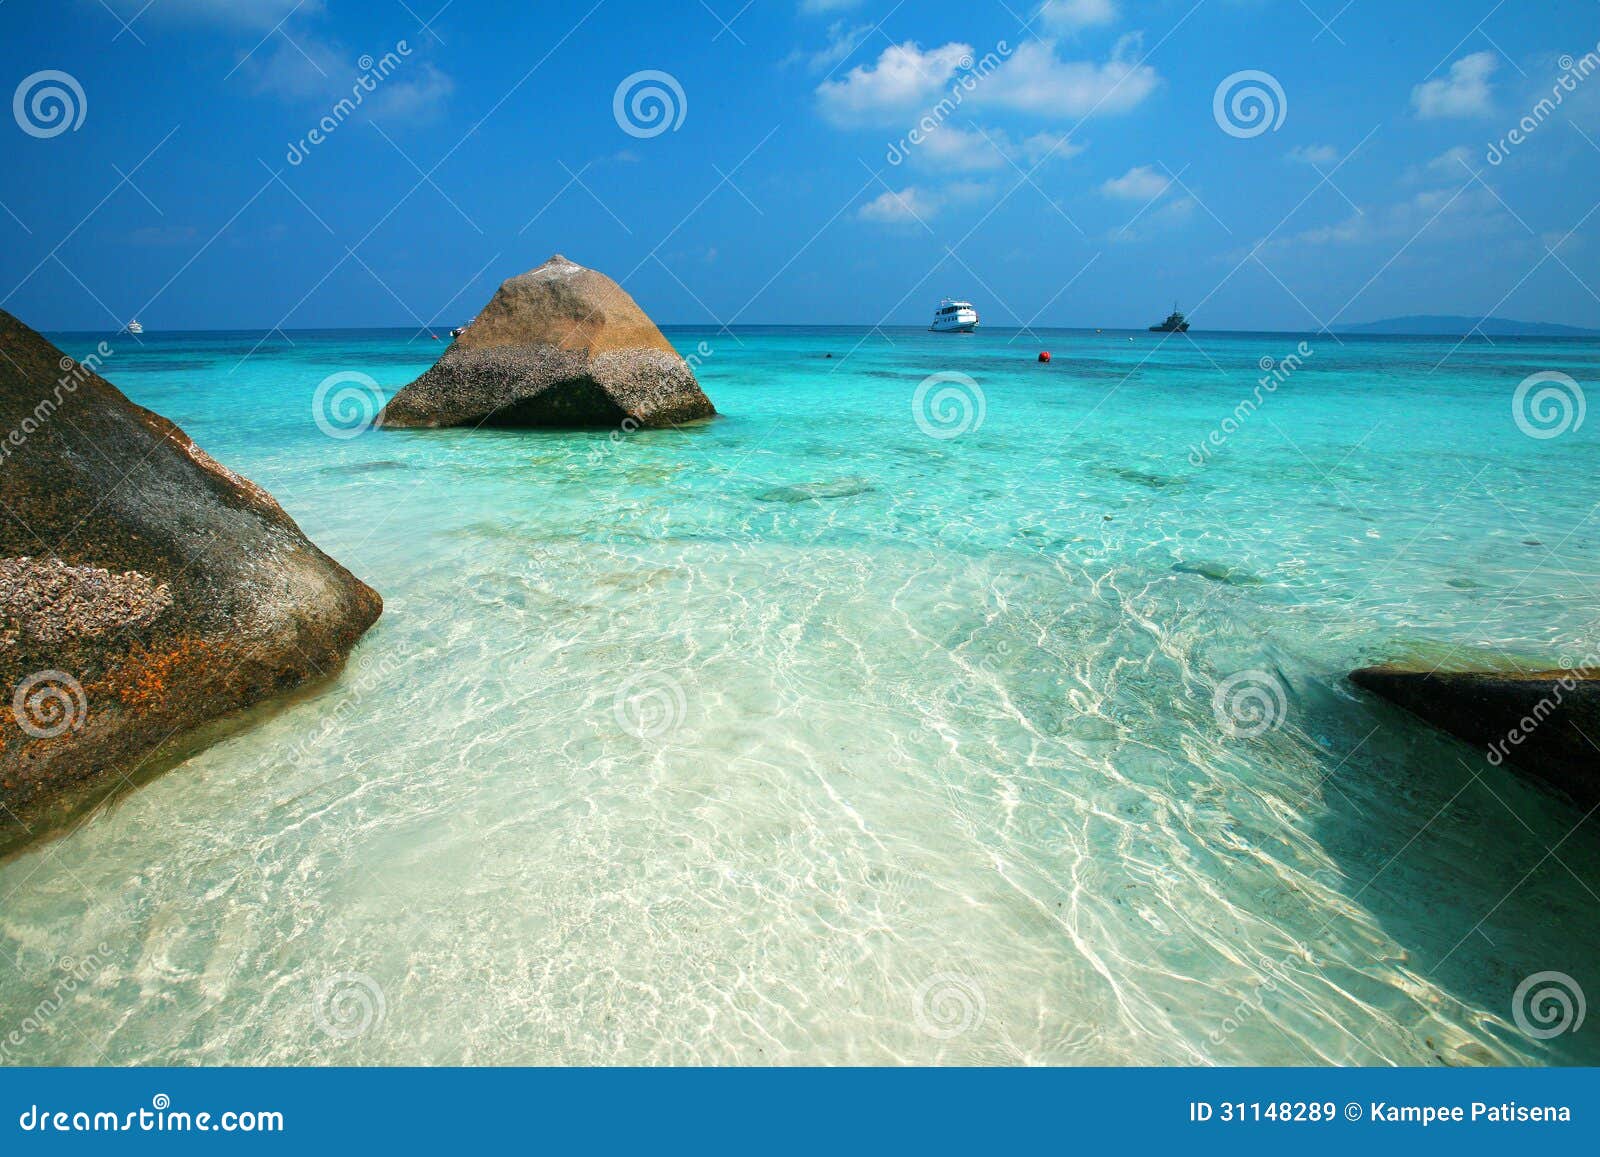 Clear Water and White Sand at Similan Island Stock Image - Image of ...